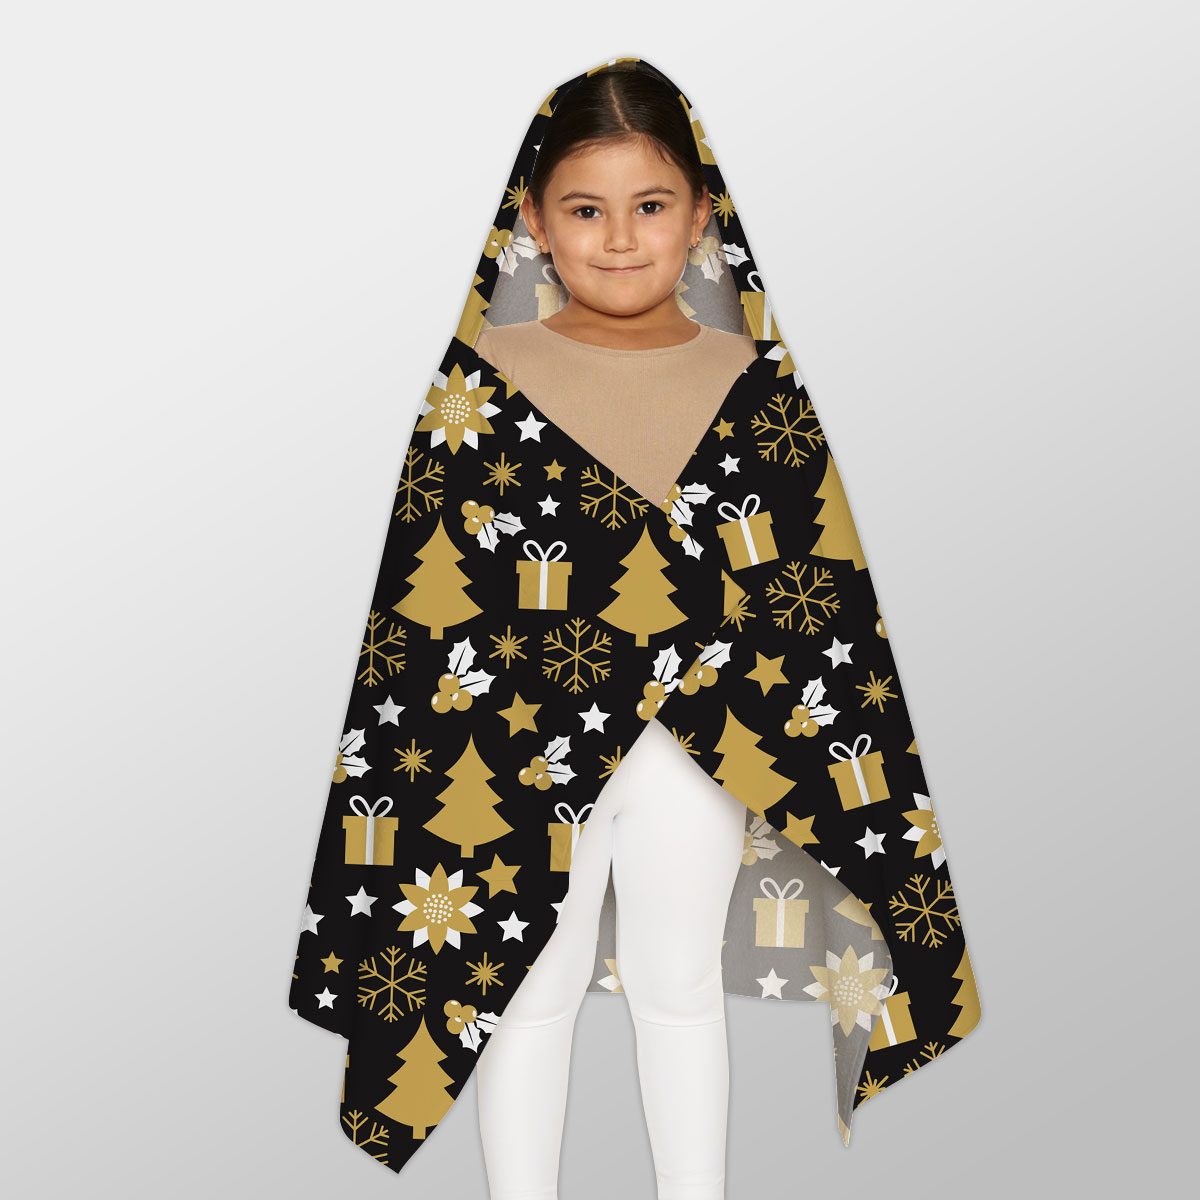 White And Gold Christmas Gift, Christmas Tree, Snowflake On Black Background Youth Hooded Towel